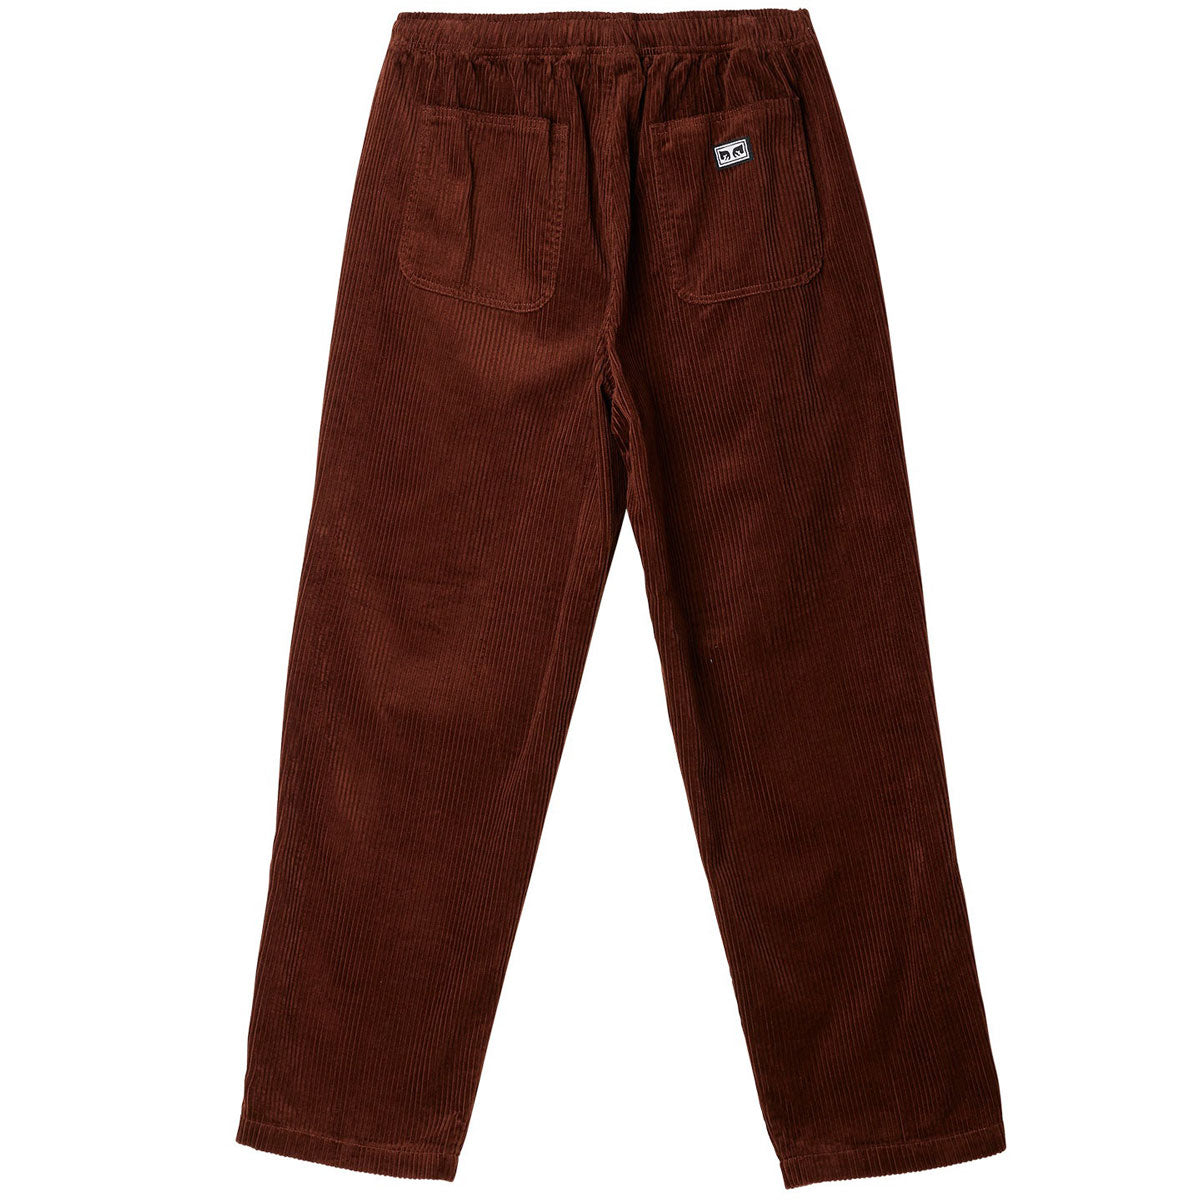 Obey Easy Cord Pants - Sepia image 2